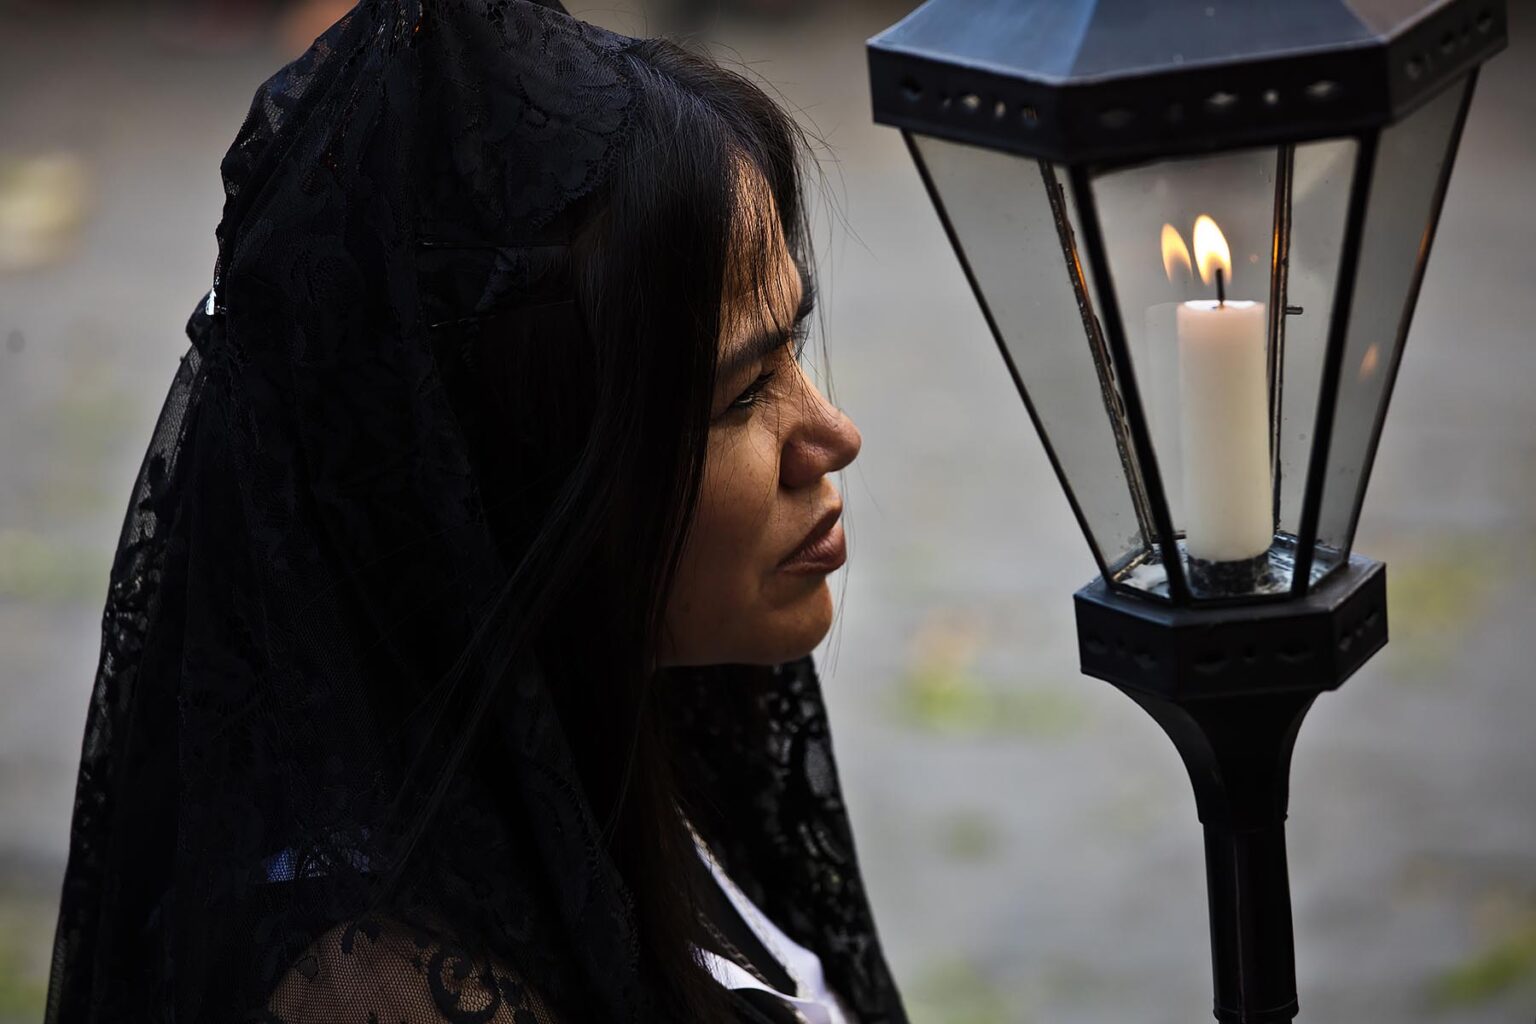 A Mexican woman dressed in traditional mantillas carries a candle lantern in the Good Friday Procession, known as the Santo Entierro, from the ORATORIO CHURCH - SAN MIGUEL DE ALLENDE, MEXICO